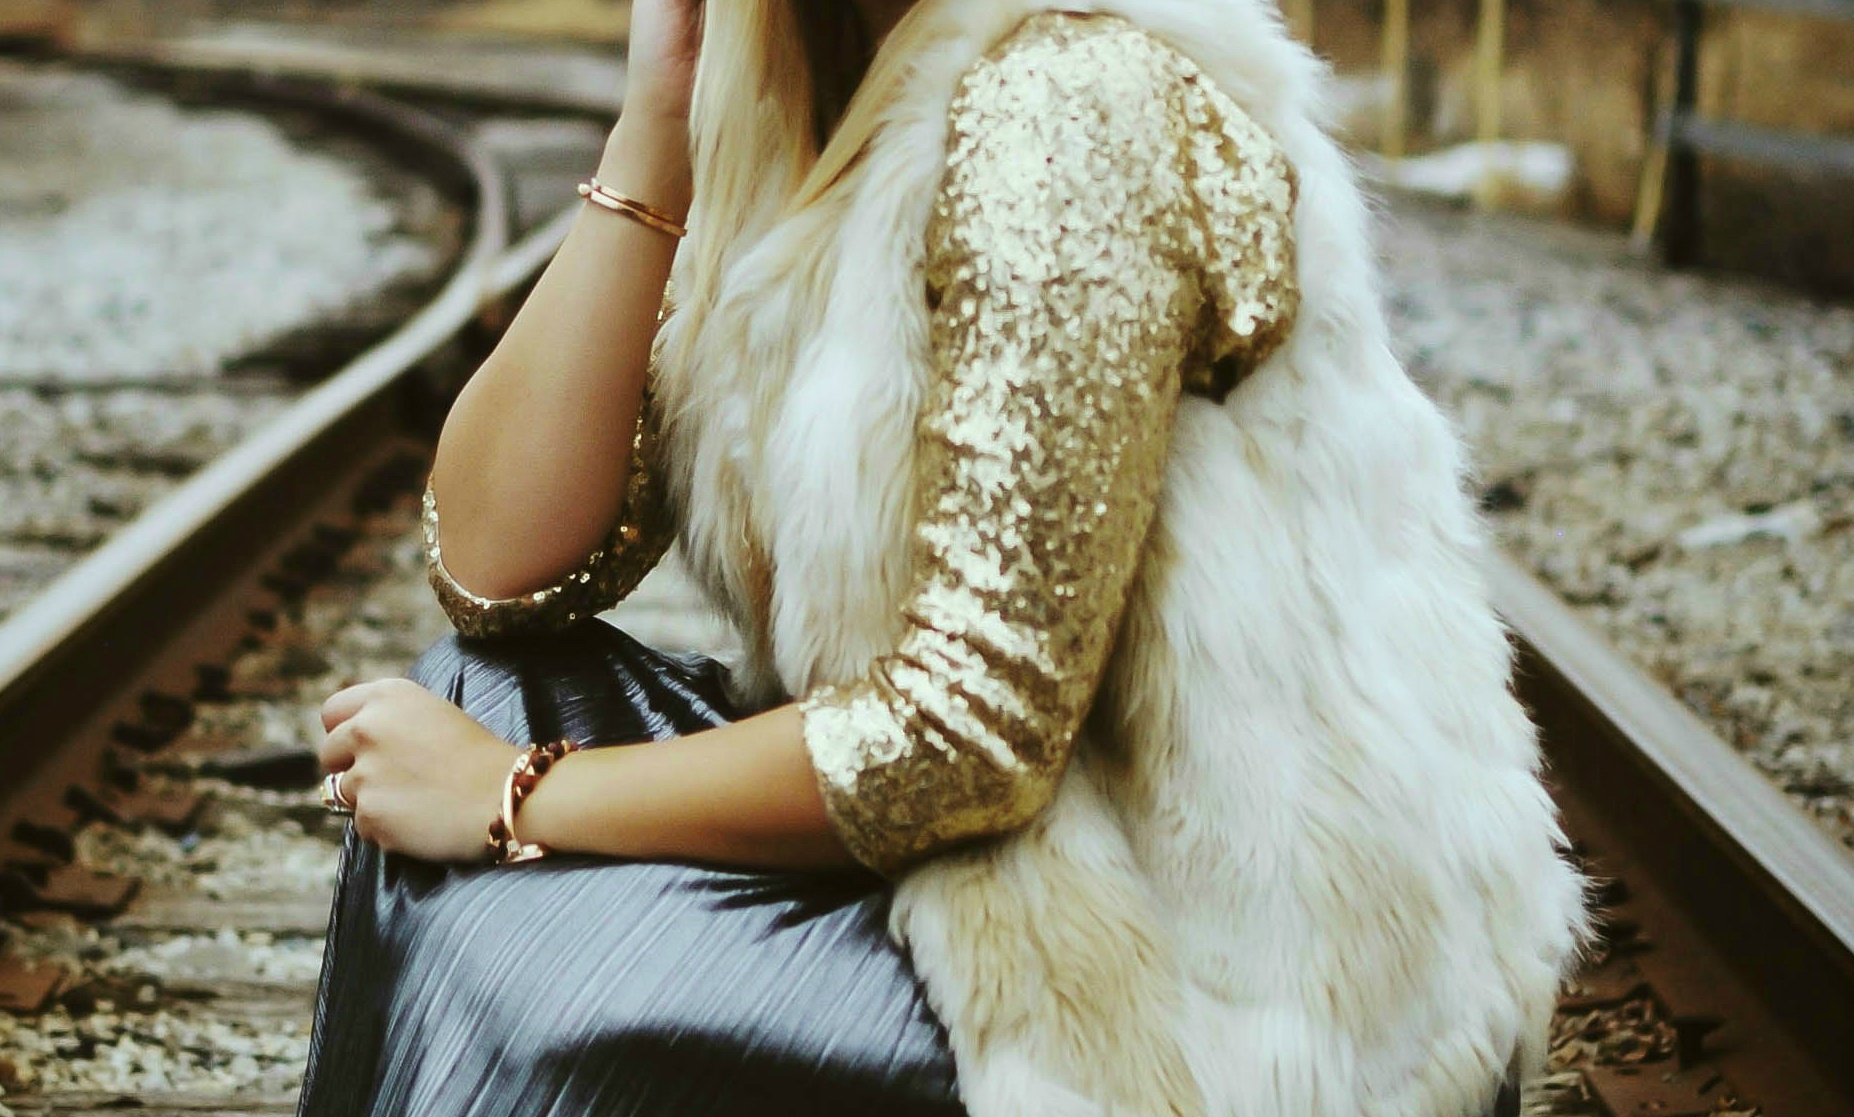 vanessa-lambert-blogger-behind-what-would-v-wear-wears-a-metallic-pleated-midi-skirt-and-cozy-faux-fur-vest-while-7-months-pregnant_6